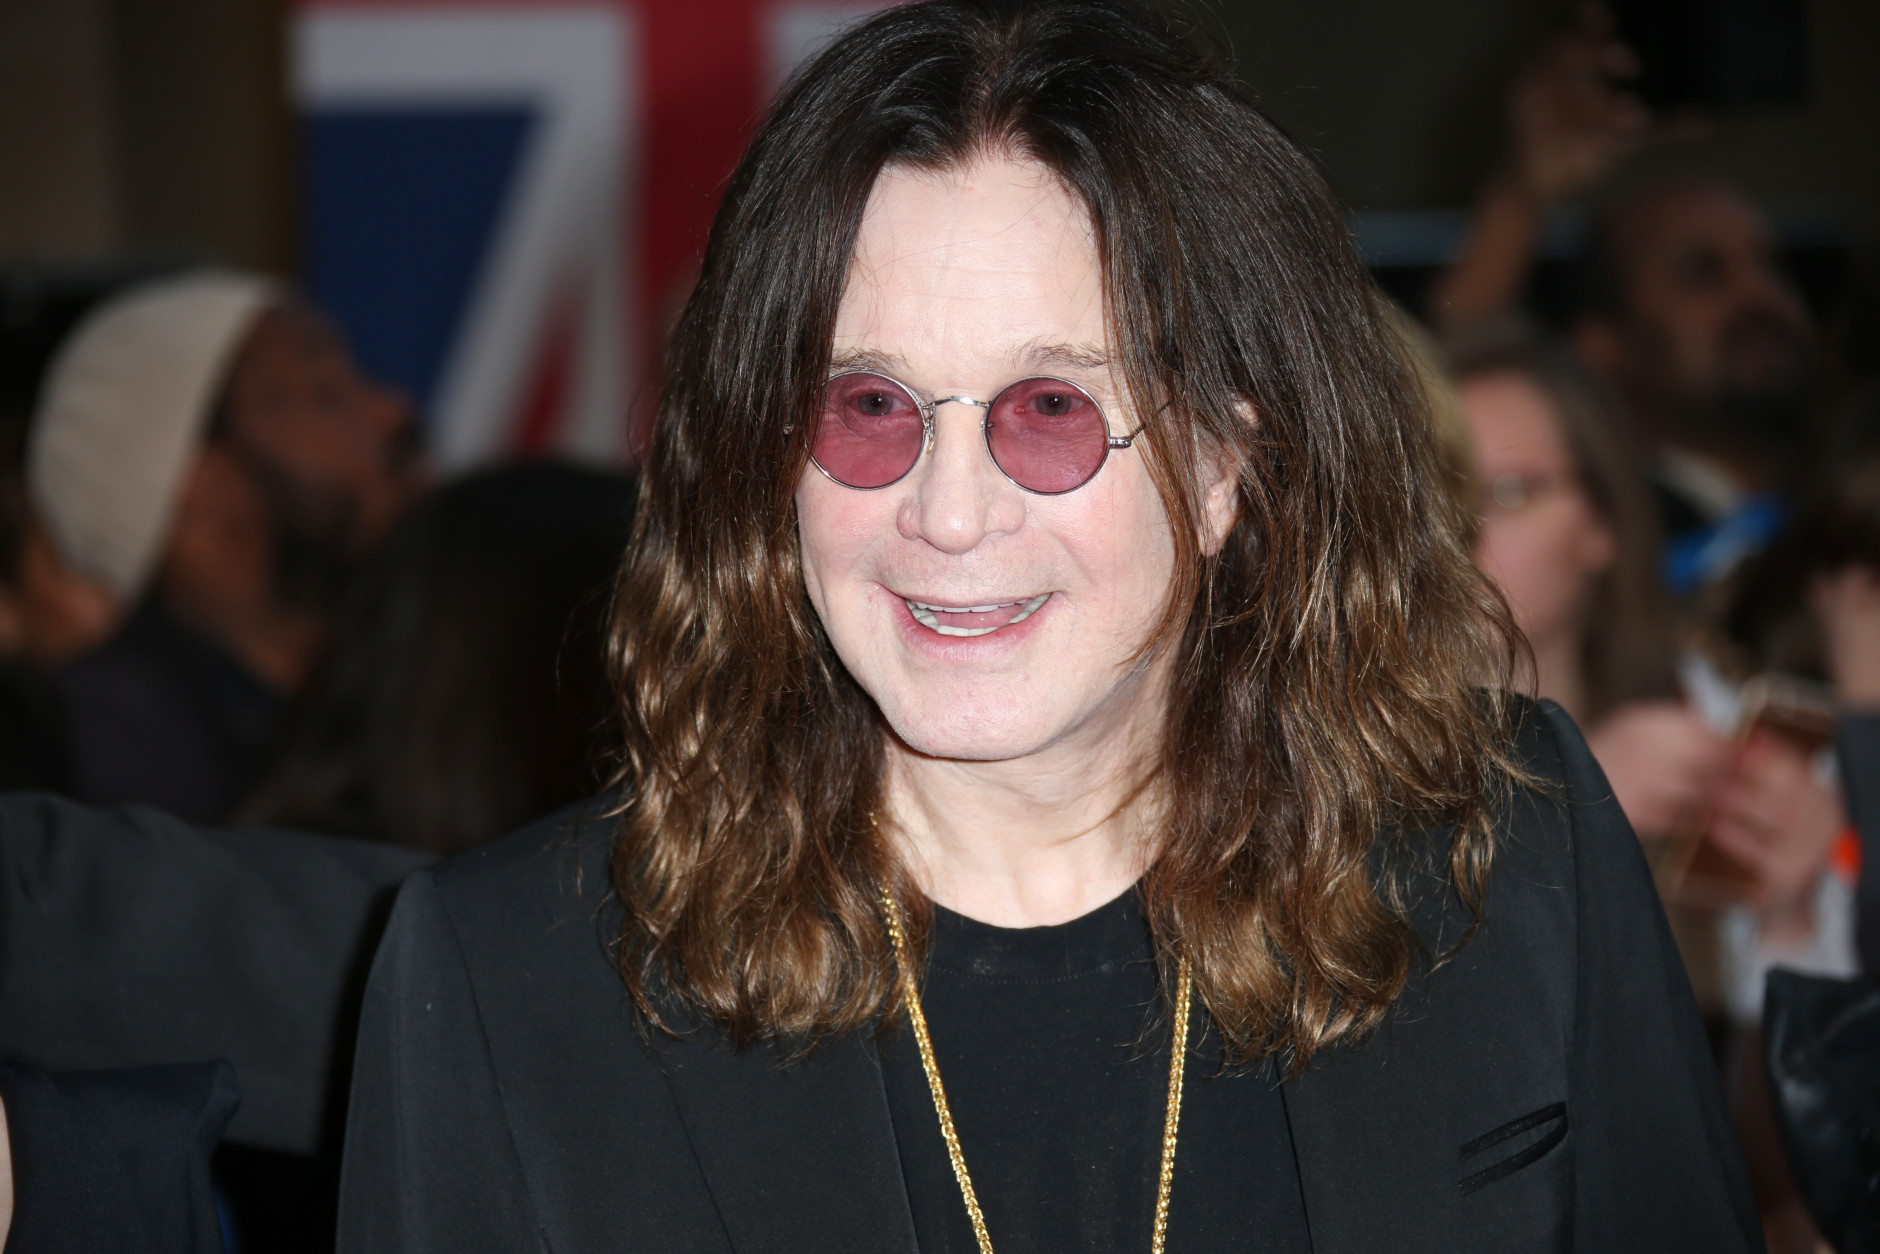 Ozzy Osbourne poses for photographers upon arrival at the Pride of Britain Awards 2015 in London, Monday, Sept. 28, 2015. (Photo by Joel Ryan/Invision/AP)